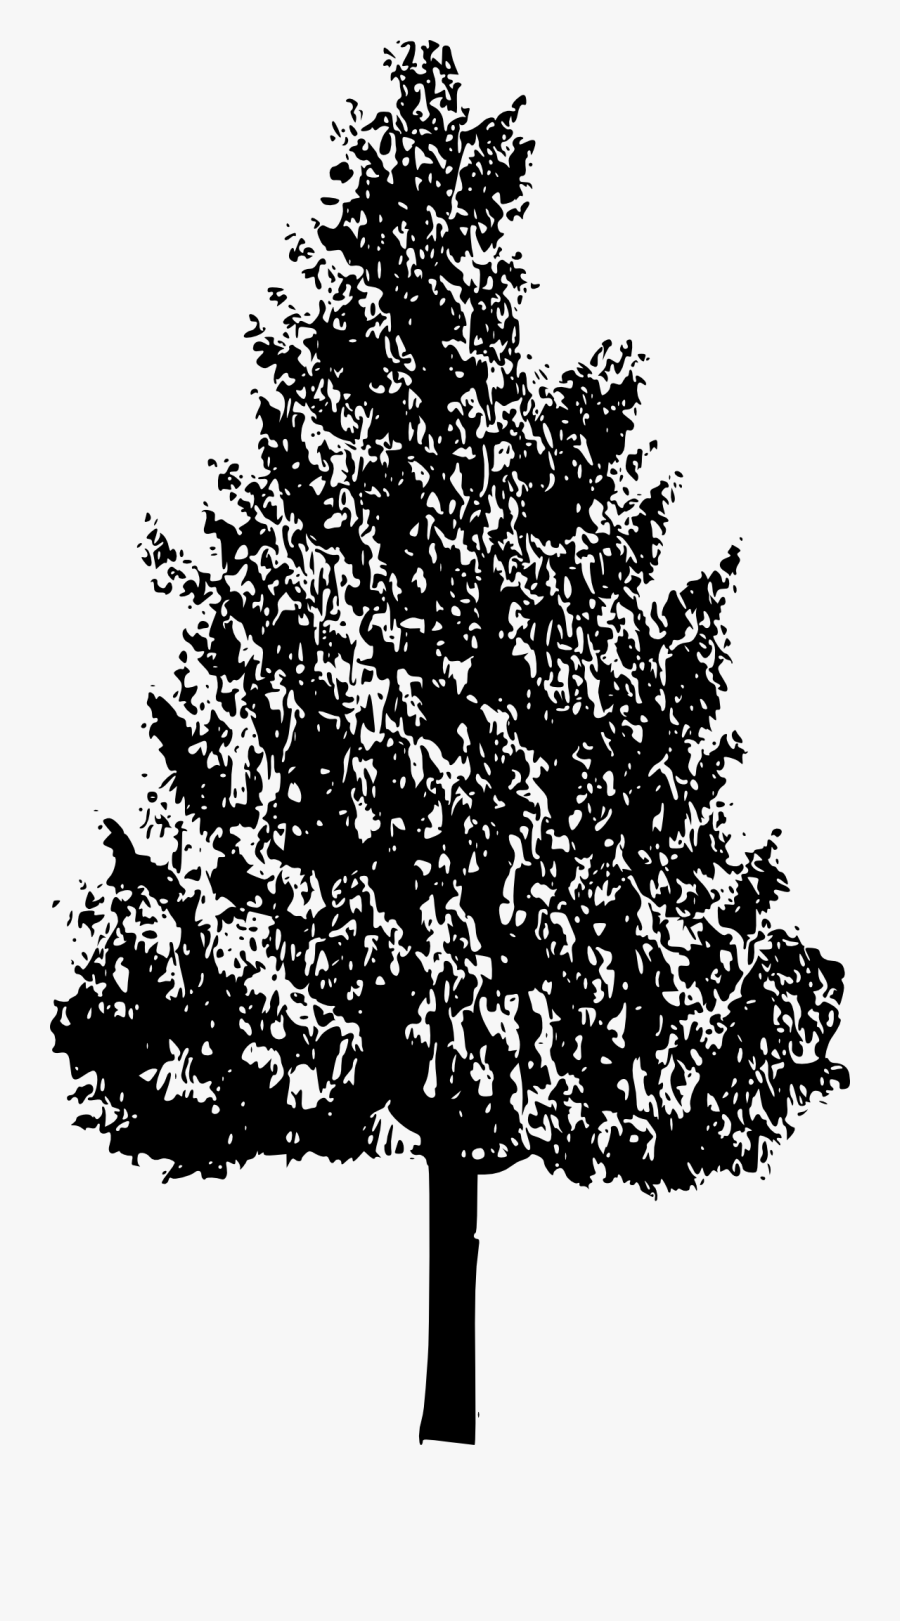 Tree Silhouette 2 - Trees Illustration Black And White, Transparent Clipart